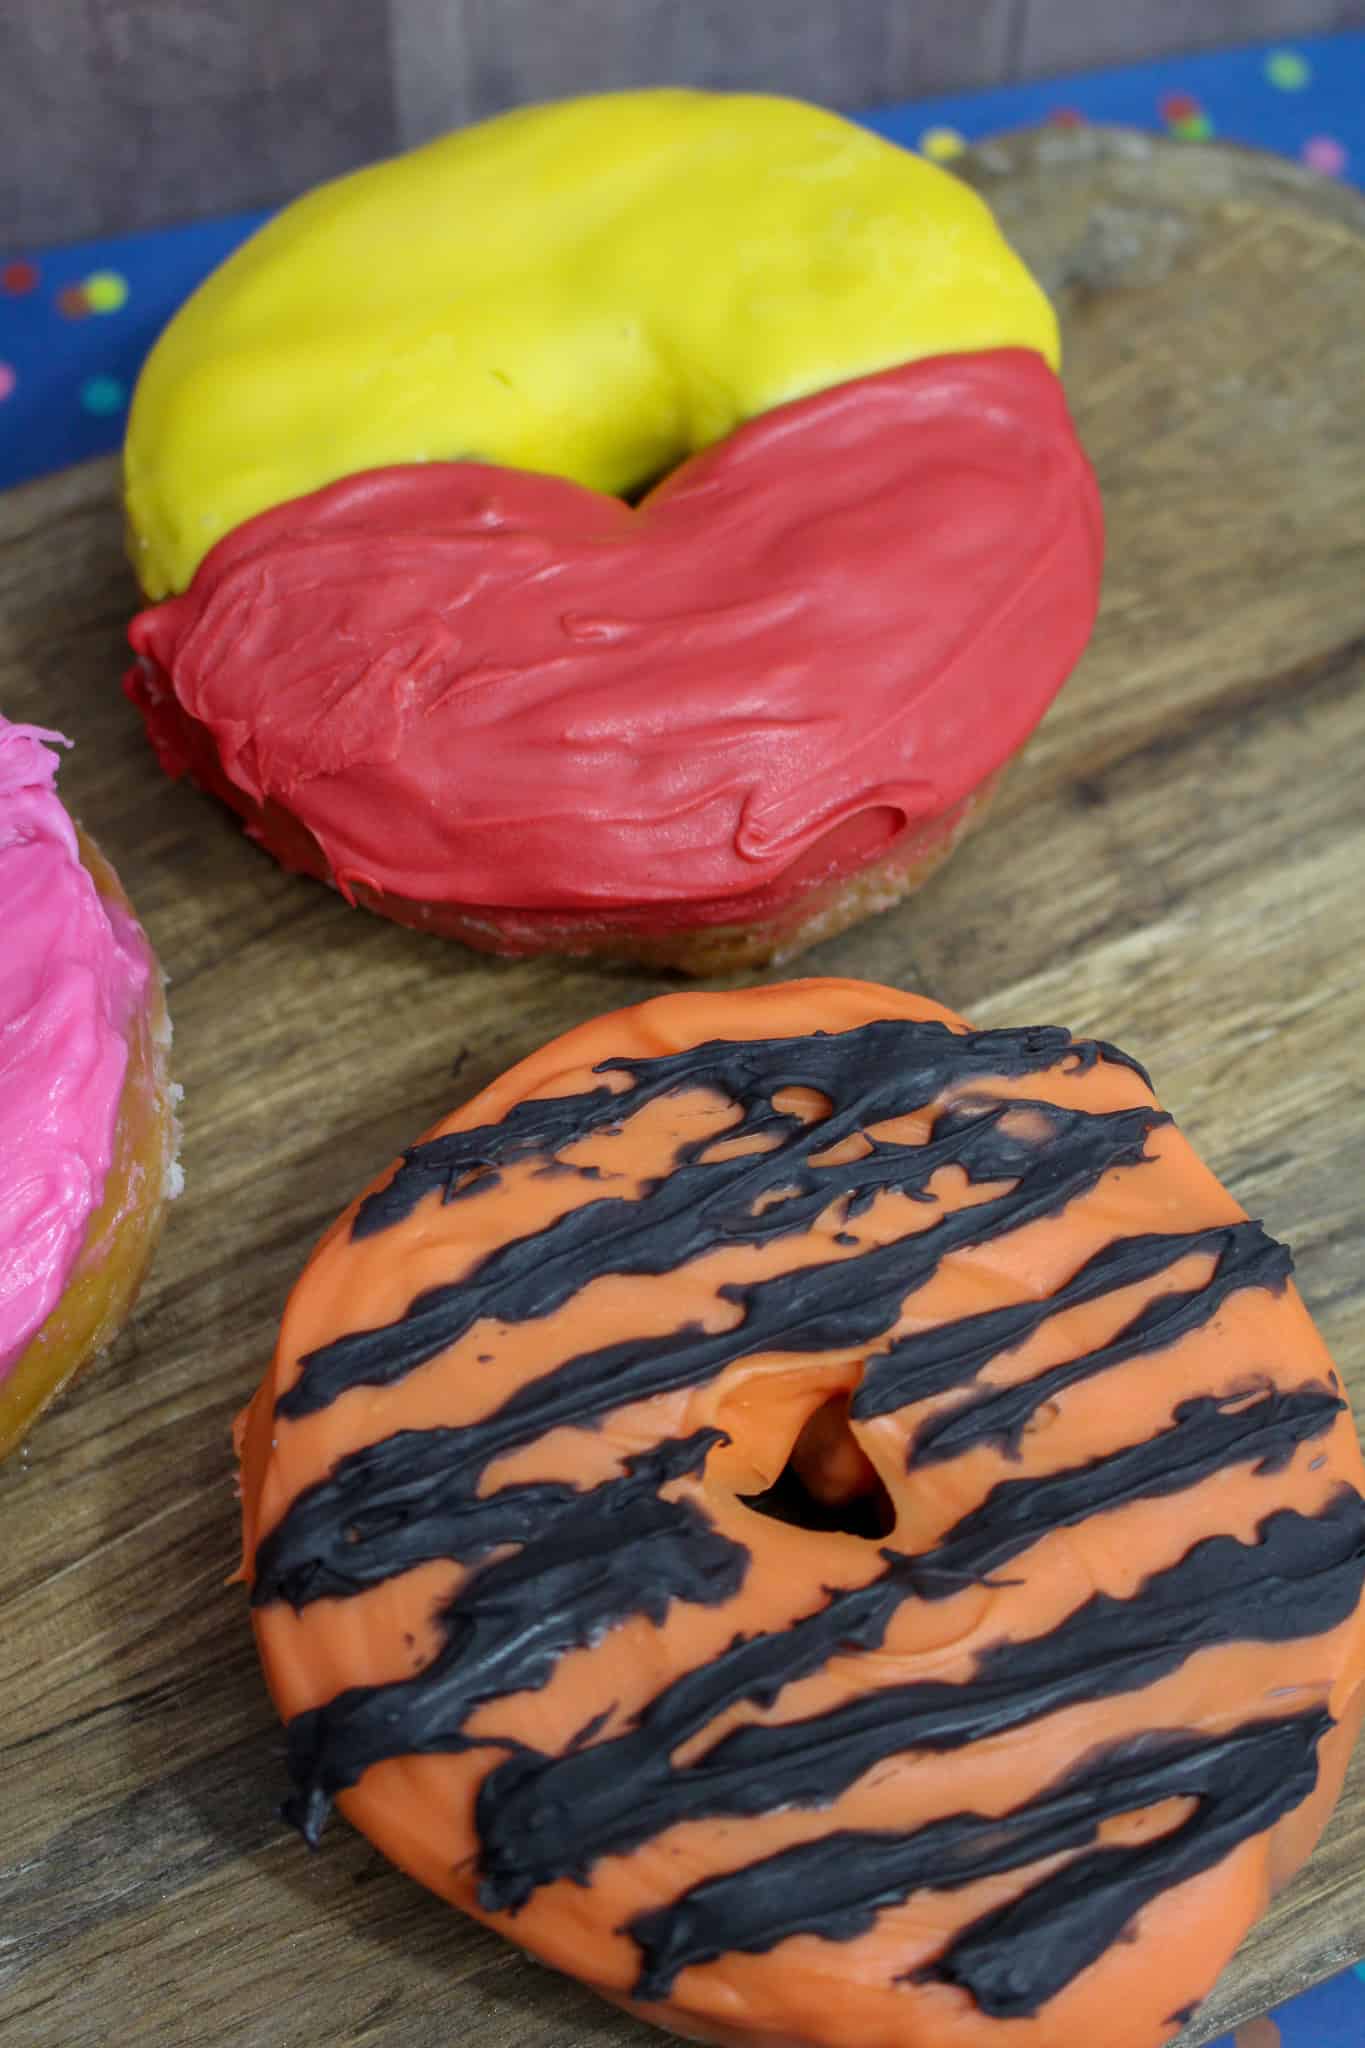 These Winnie the Pooh Doughnuts are the perfect treat for any kid! The Christopher Robin movie is full of great life lessons as well as inspiration for these delicious Winnie the Pooh Doughnuts! #Doughnuts #winniethepooh #breakfast #easybreakfast